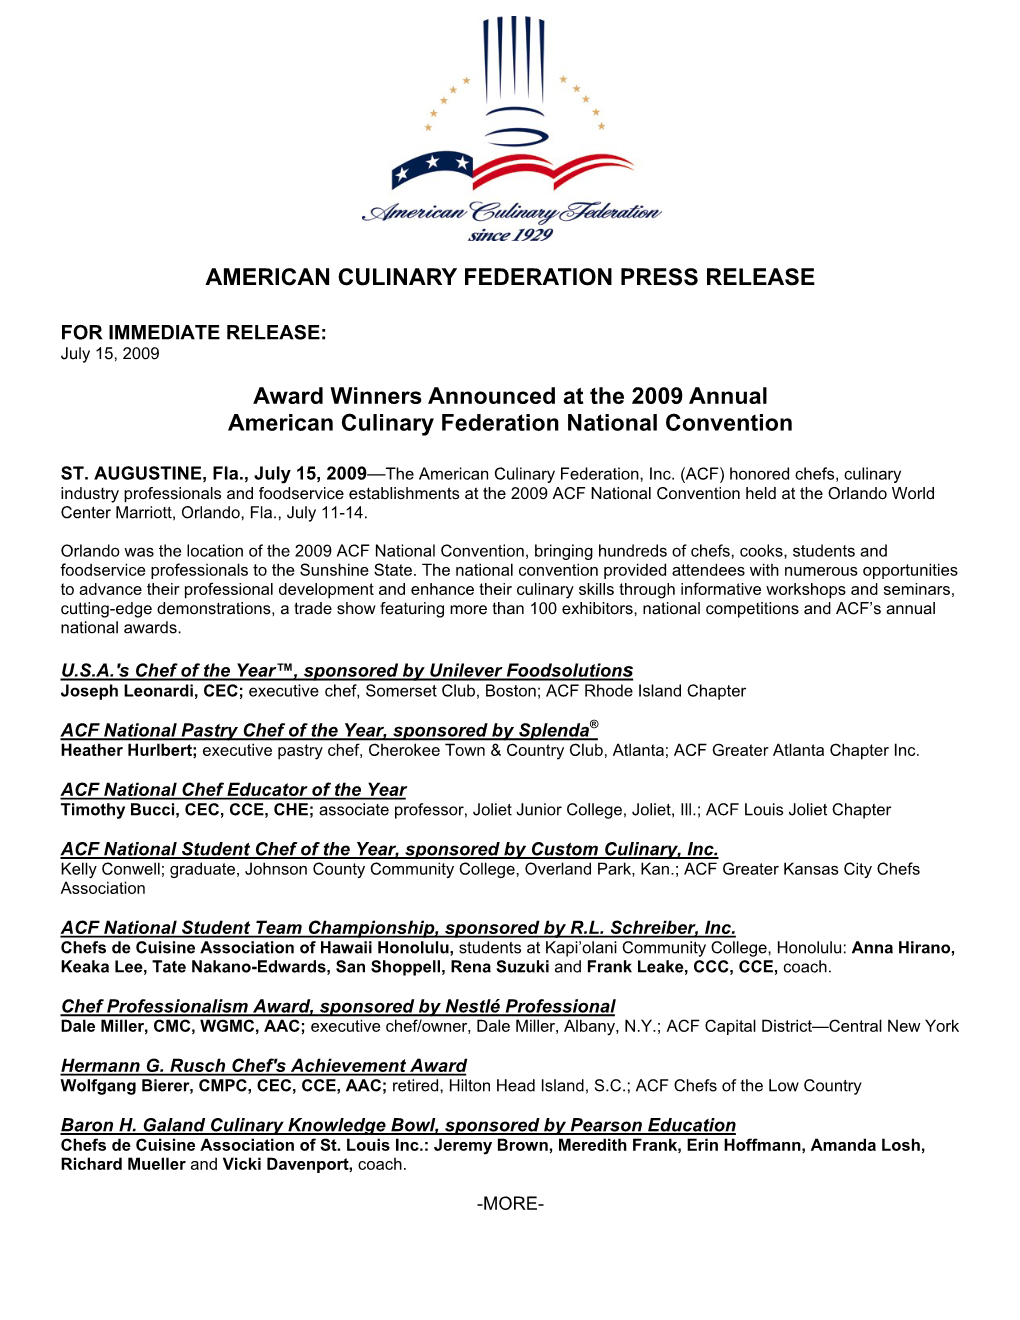 Award Winners Announced at the 2009 Annual American Culinary Federation National Convention